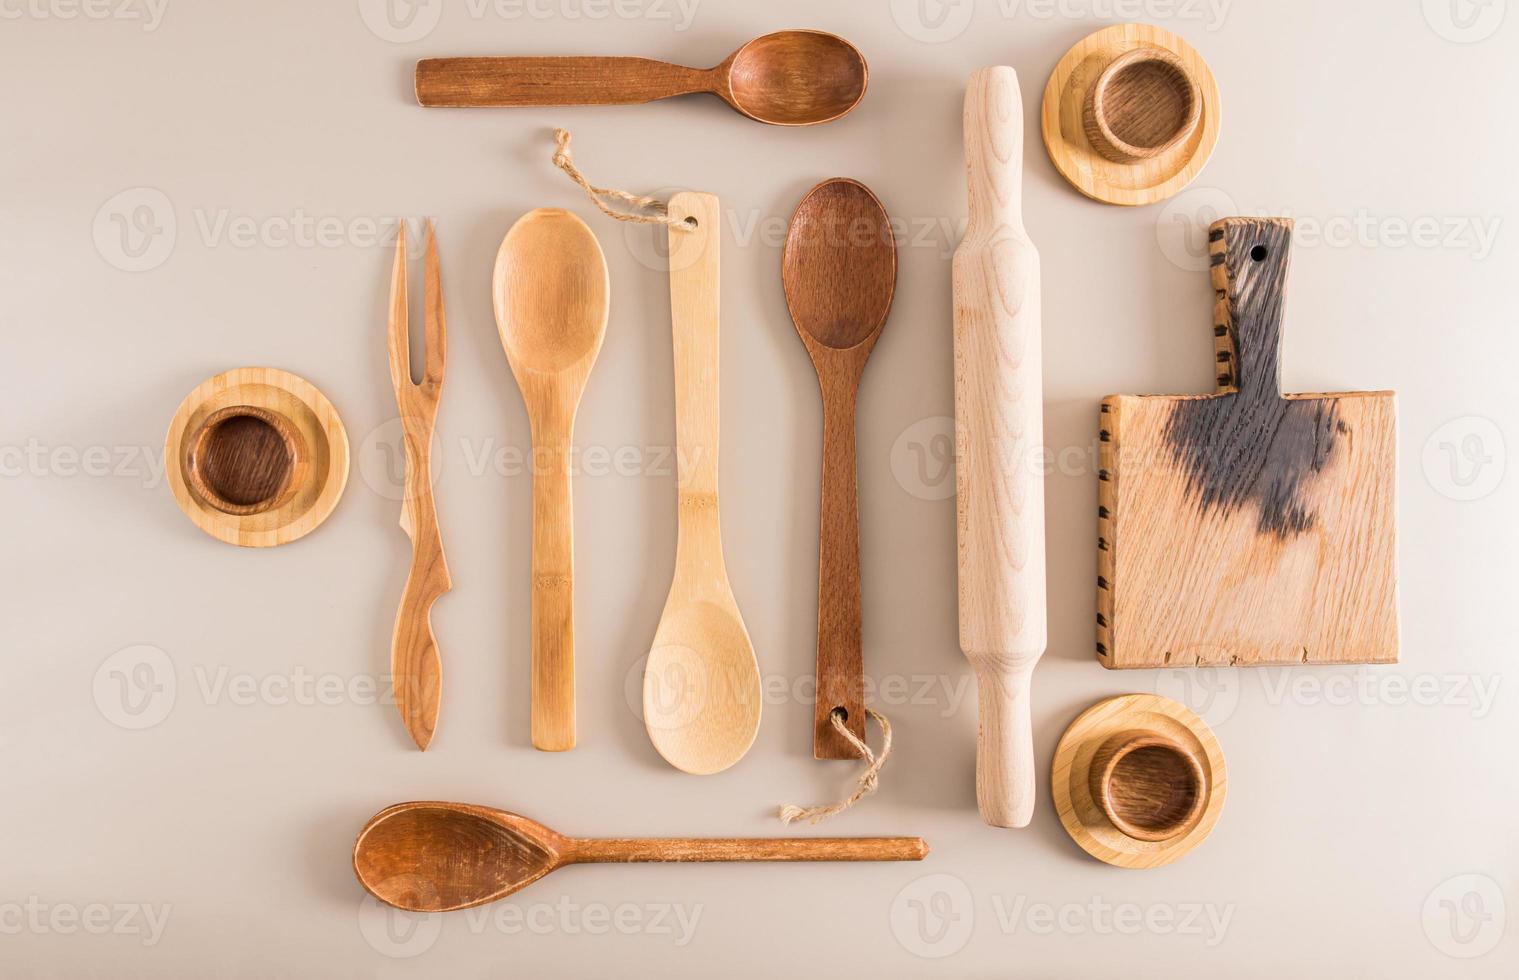 https://static.vecteezy.com/system/resources/previews/012/876/561/non_2x/a-set-of-various-wooden-spoons-cups-and-a-cutting-board-on-a-light-background-top-view-flat-styling-kitchen-background-photo.jpg